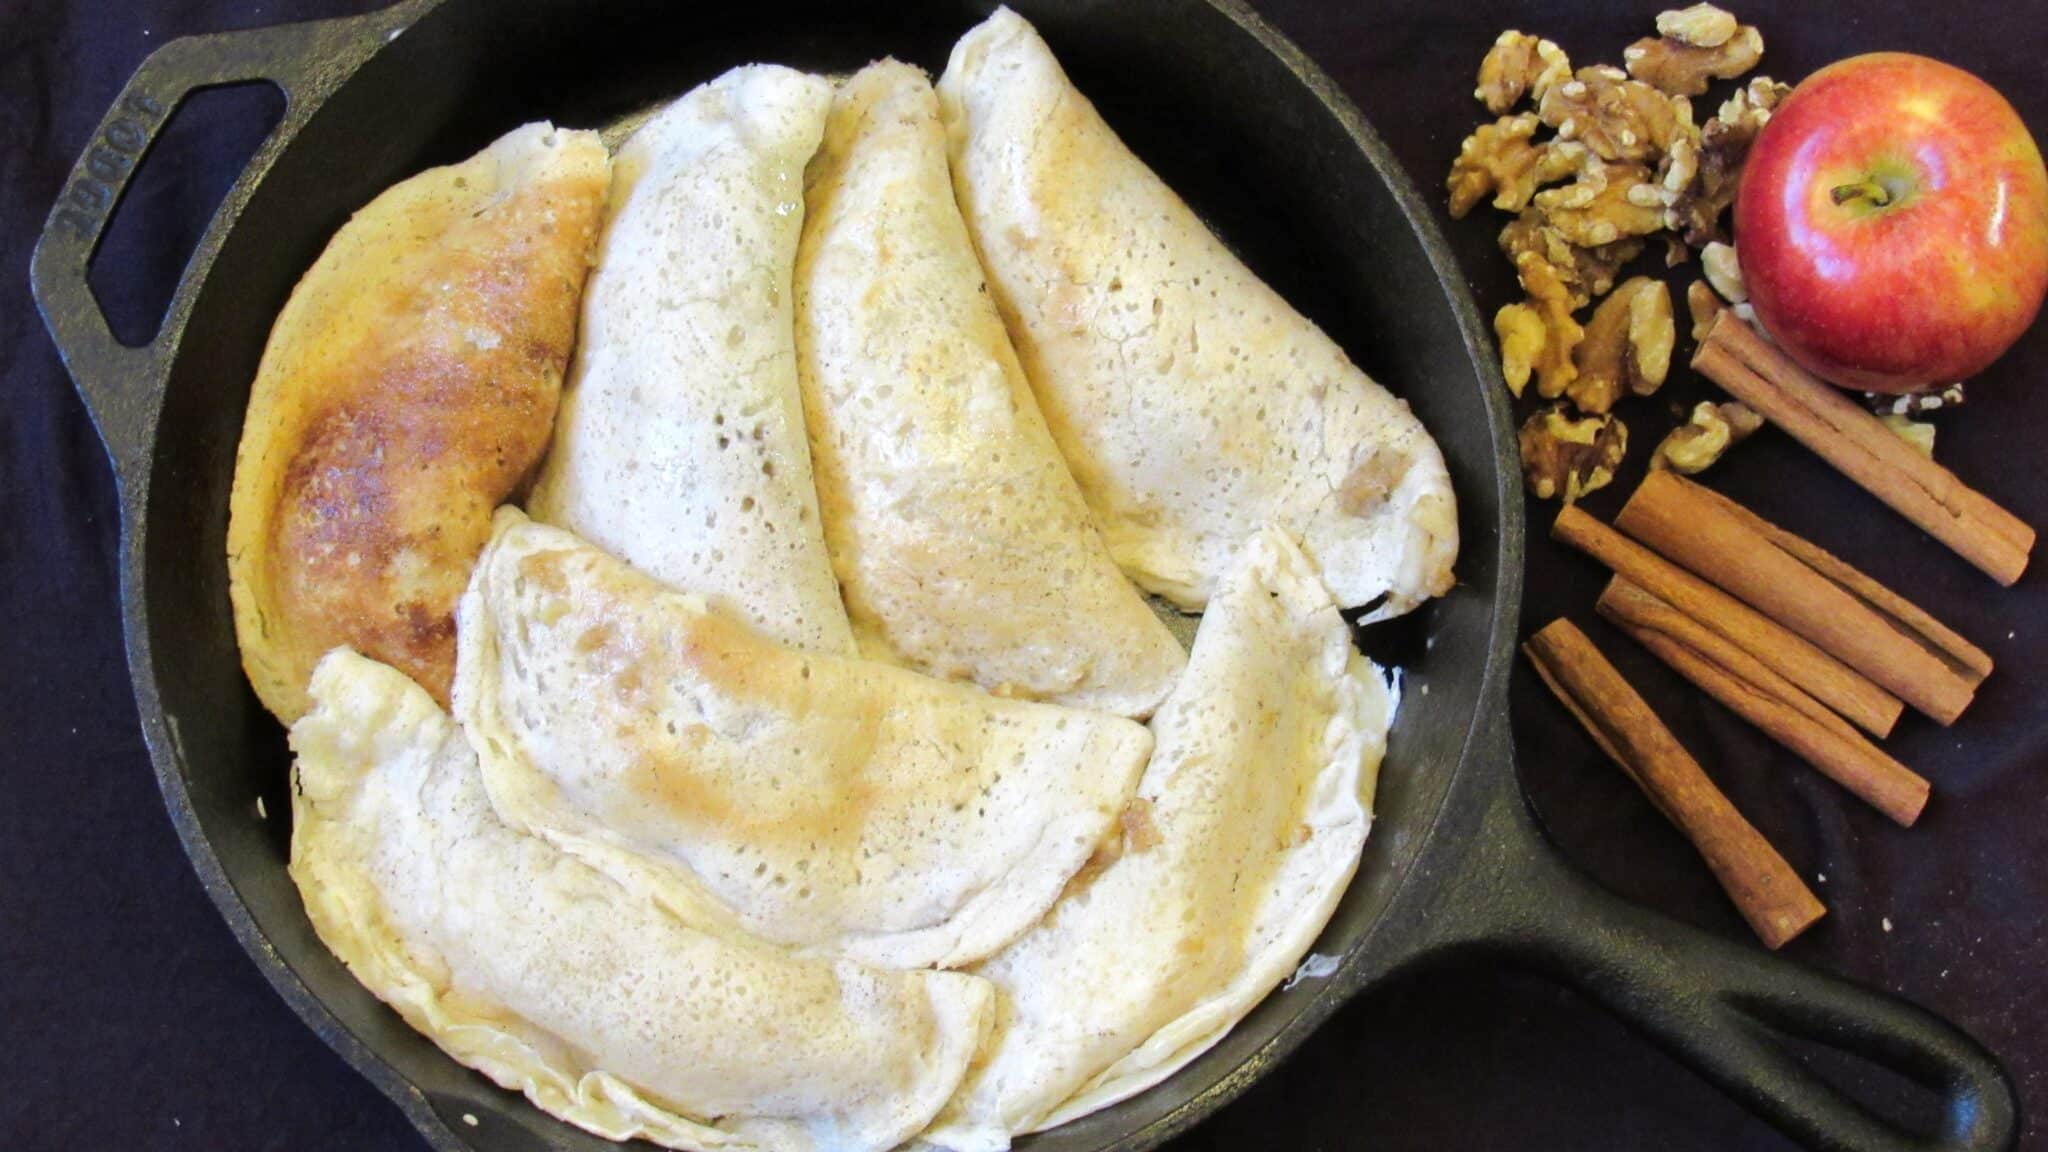 Seven apple enchiladas made with tortillas are placed on a cast-iron skillet and ready to bake in the oven.